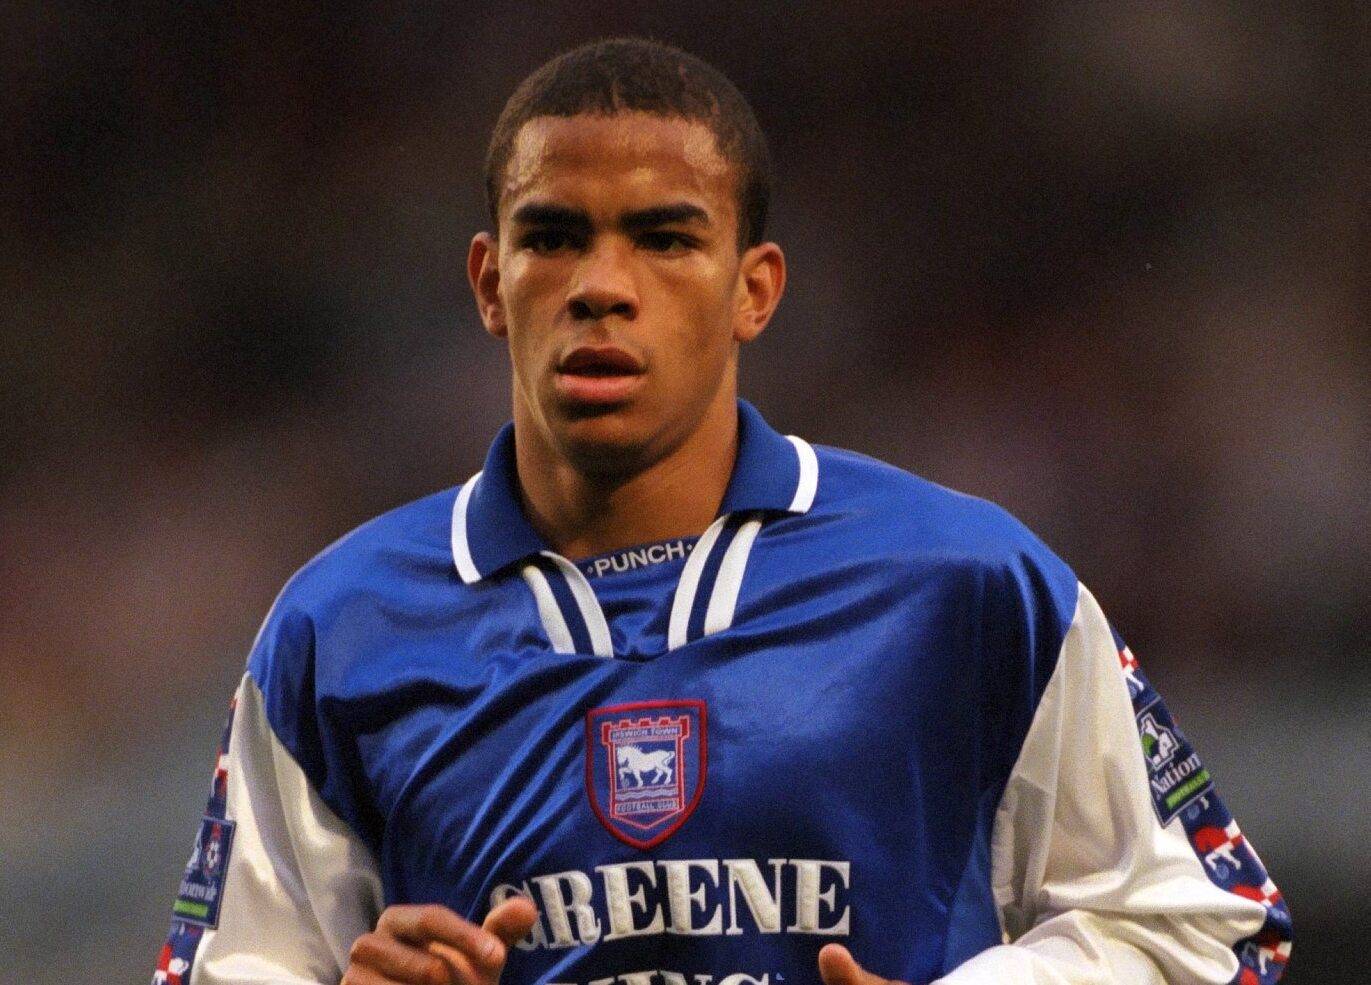 Kieron Dyer was part of one of the most awkward interviews ever after being randomly stopped in the street at Ipswich Town.